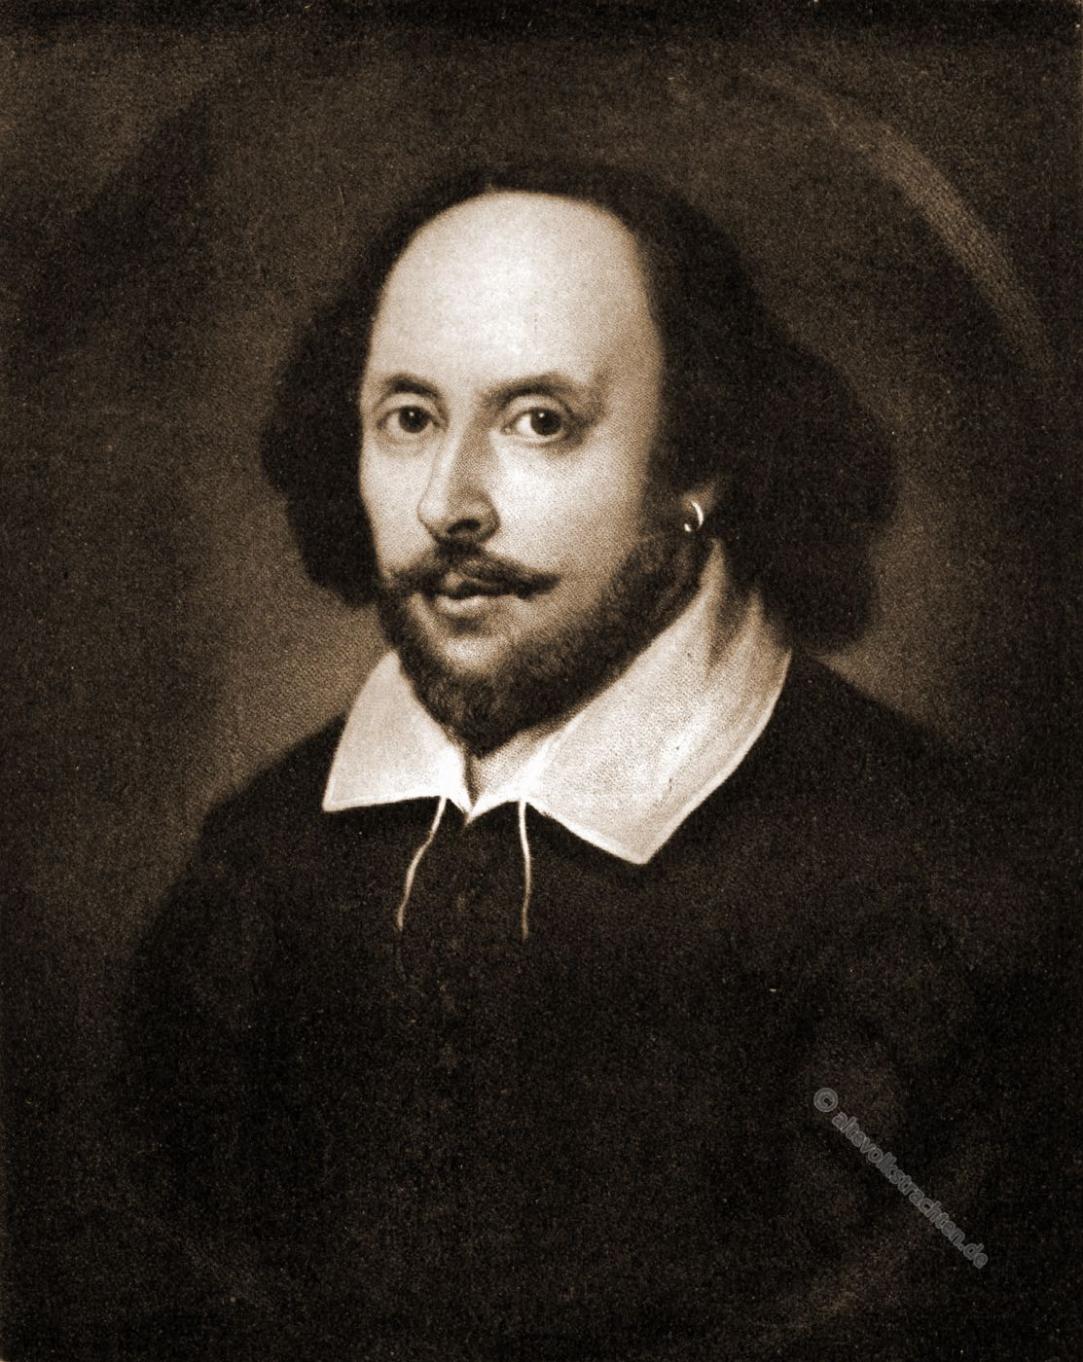 How Did Shakespeare's Personal Life Influence His Writing?